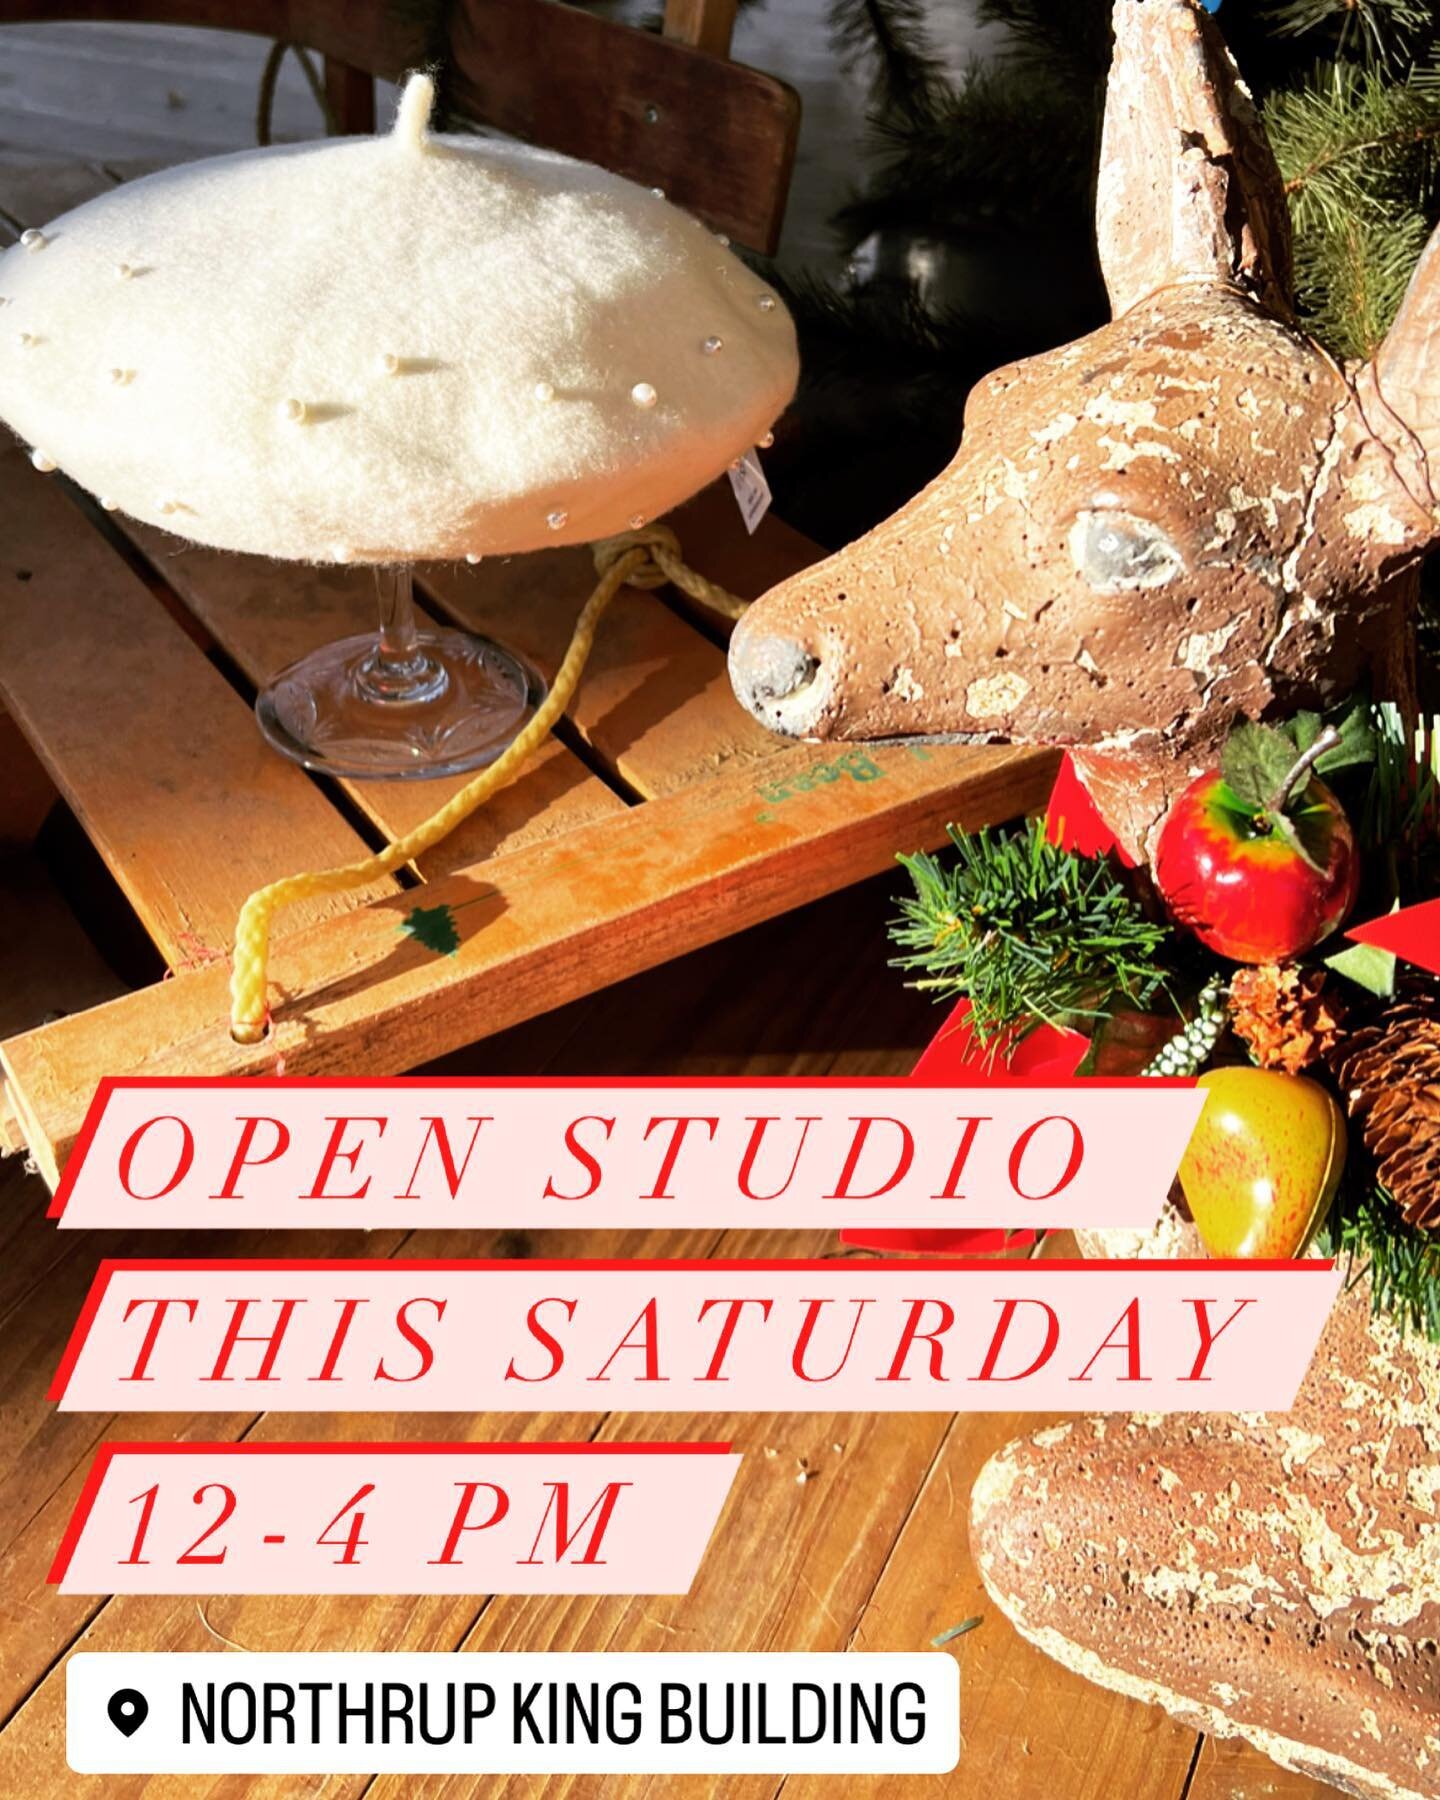 Holiday shopping open studio hours! This Saturday, Dec 3rd : Noon-4pm 
@northrupkingbuilding Studio 225
🎁
Berets, wiggle bows, and other giftables are going quickly!
💋
#celinakane #mpls #milliner #hat #hats #beret #gifts #christmasgifts #hanukkahgi